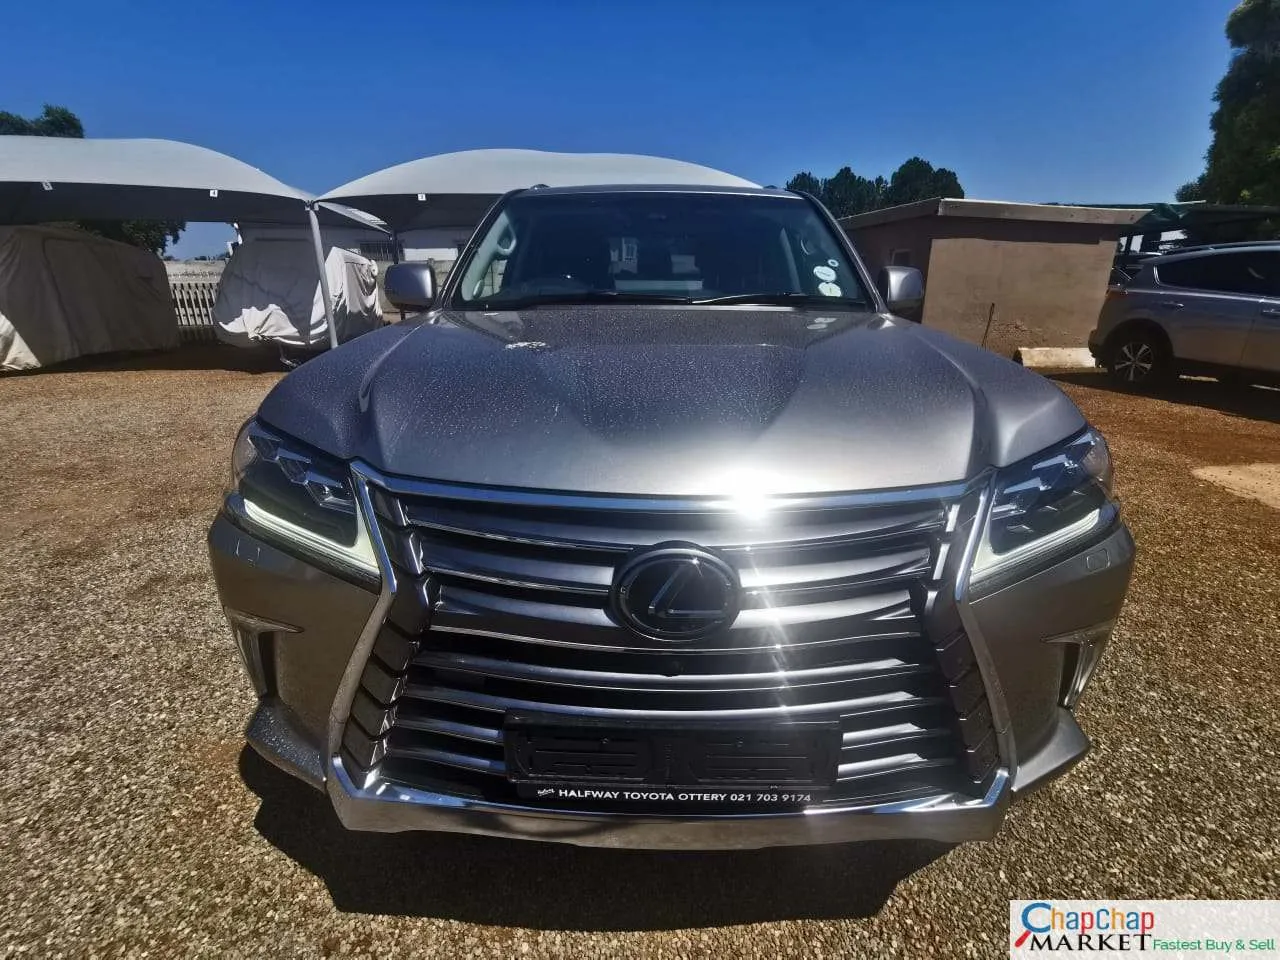 Cars Cars For Sale-LEXUS LX 450D 450 D 🔥 🔥 Just Arrived Fully Loaded EXCLUSIVE! 2